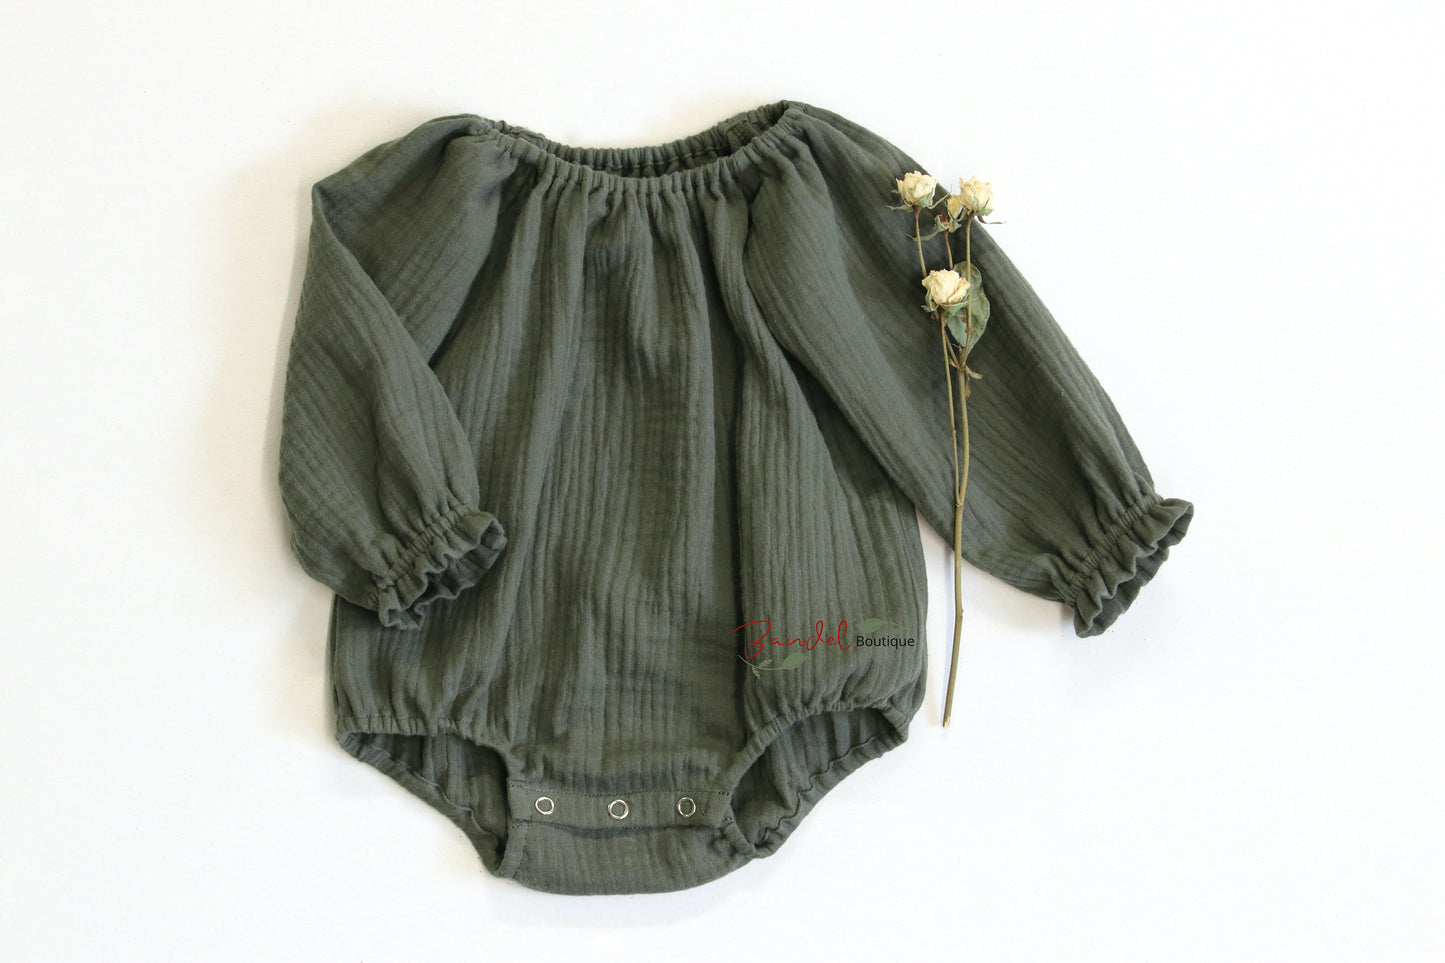 Handmade olive green minimalist newborn baby romper with long sleeves, made from breathable and soft double gauze organic fabric. Features elasticized openings and crotch snaps for easy dressing and maximum comfort. 